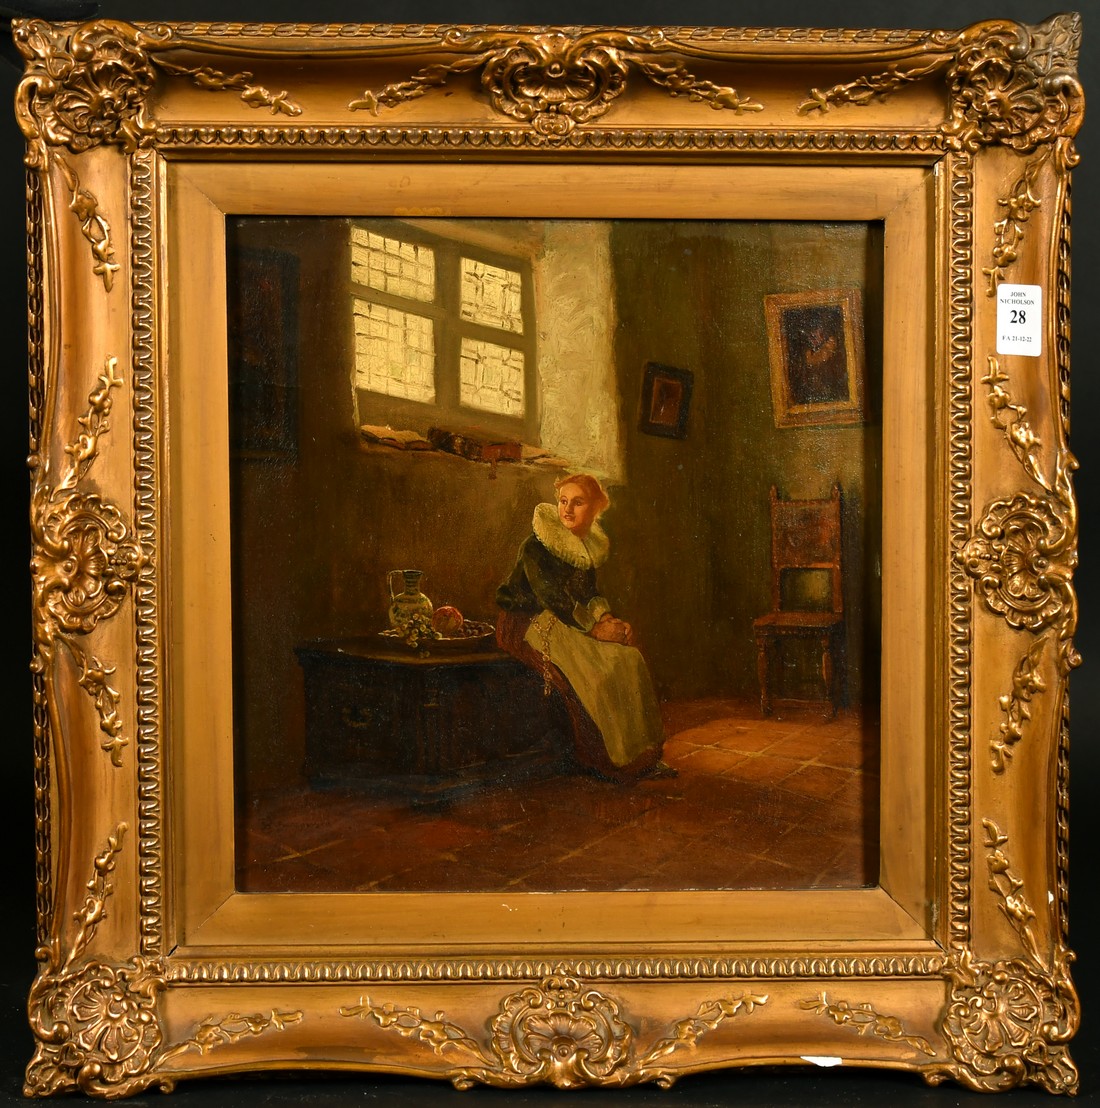 Dutch School, circa 1900, An interior scene with a young lady seated on a wooden coffer next to a - Image 2 of 4